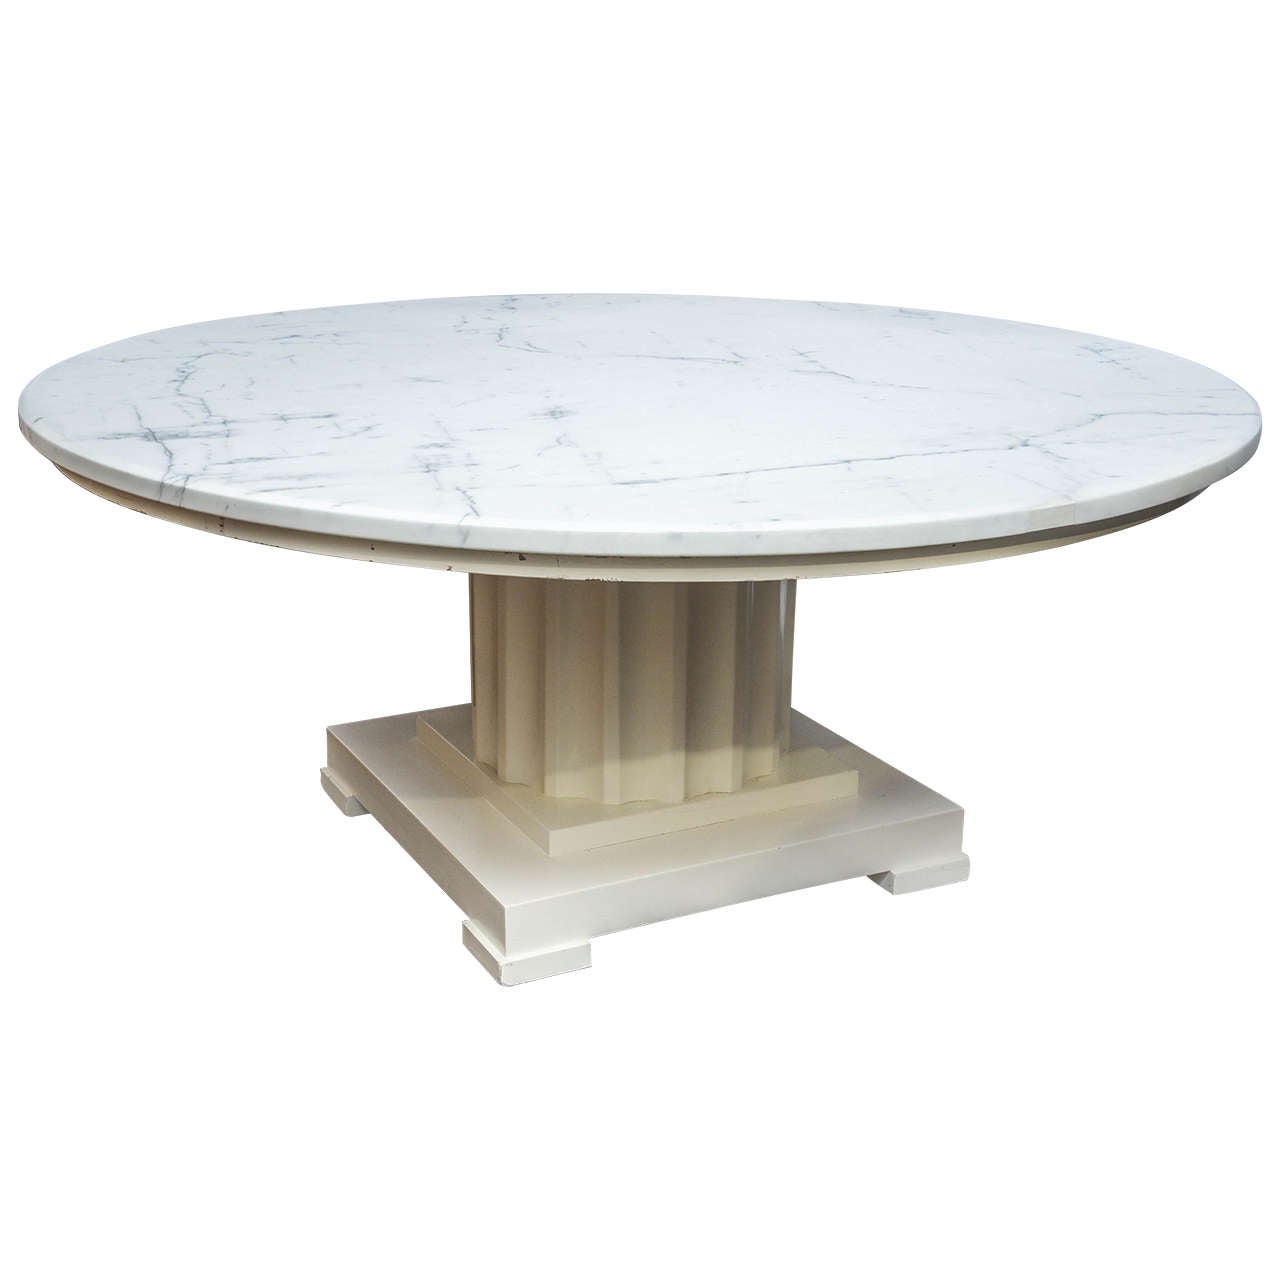 Vintage Neoclassic Round Marble Coffee Table